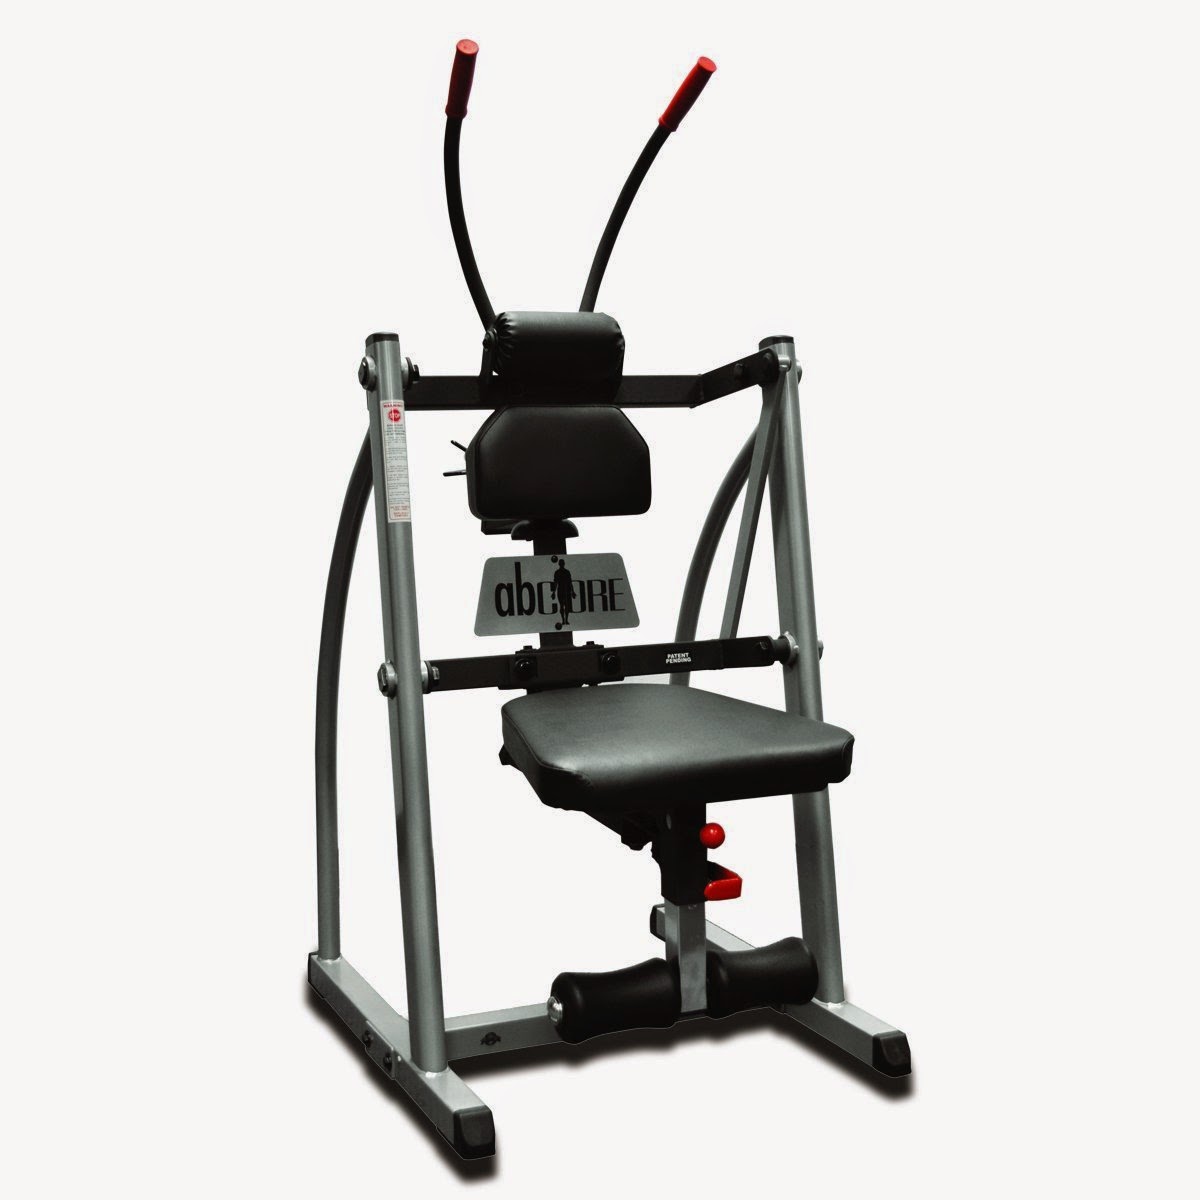 Abcore Junior Abdominal Machine, review, strengthen & tone your upper and lower abdominal muscles. target abs, professional home version of commercial Abcore